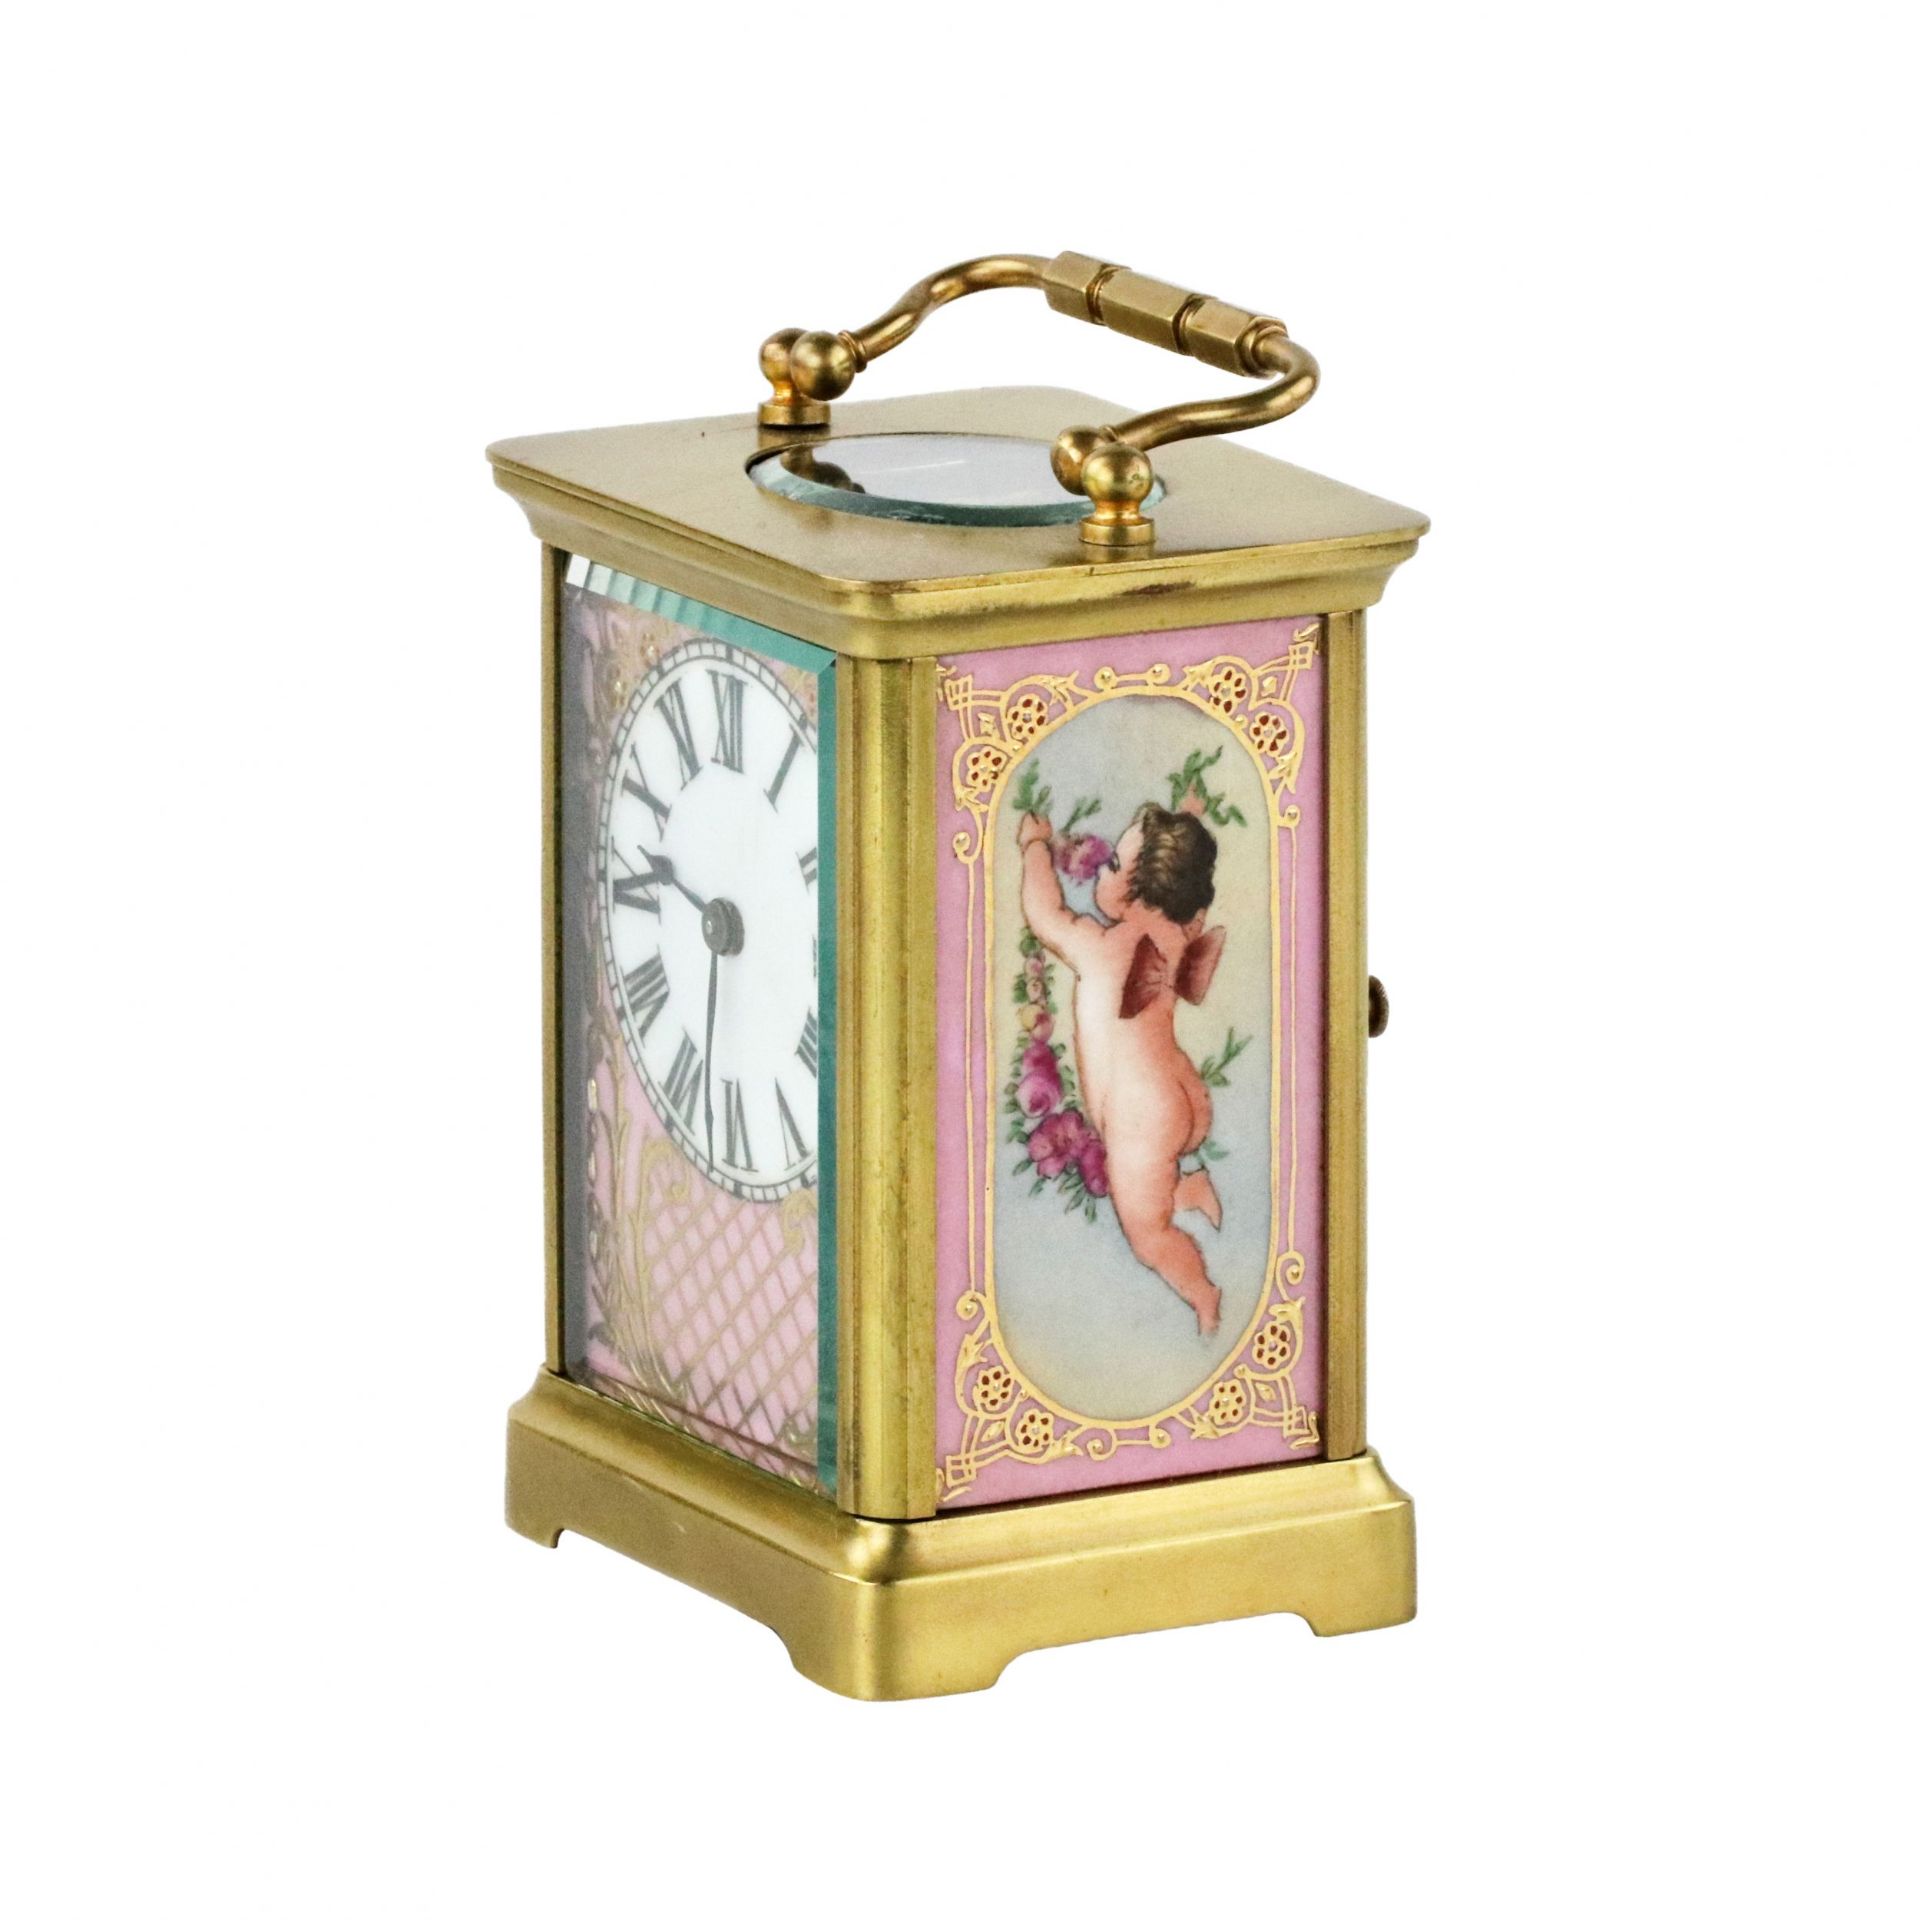 French carriage clock with porcelain painting, neo-rococo style. The turn of the 19th-20th centuries - Image 3 of 7